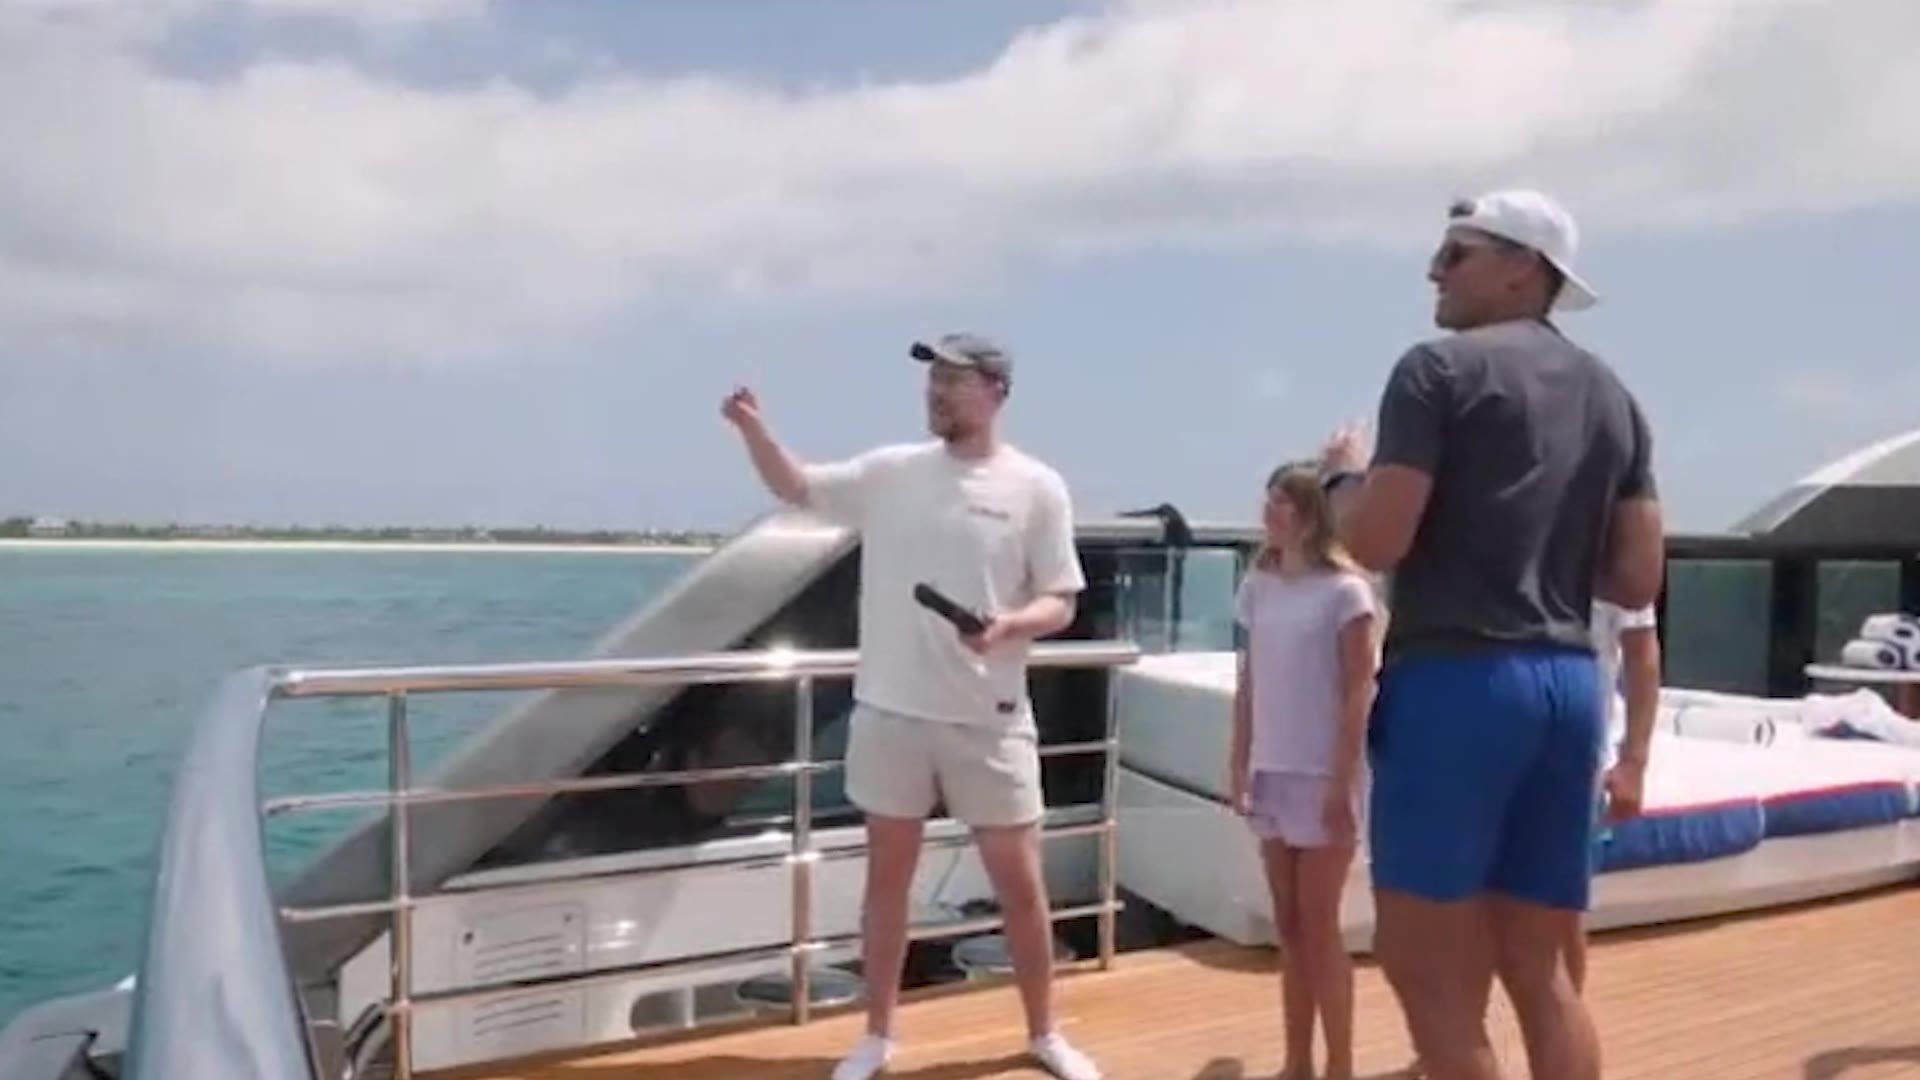 Tom Brady knocks MrBeast’s drone out of air in viral YouTube video - coinmag.fun